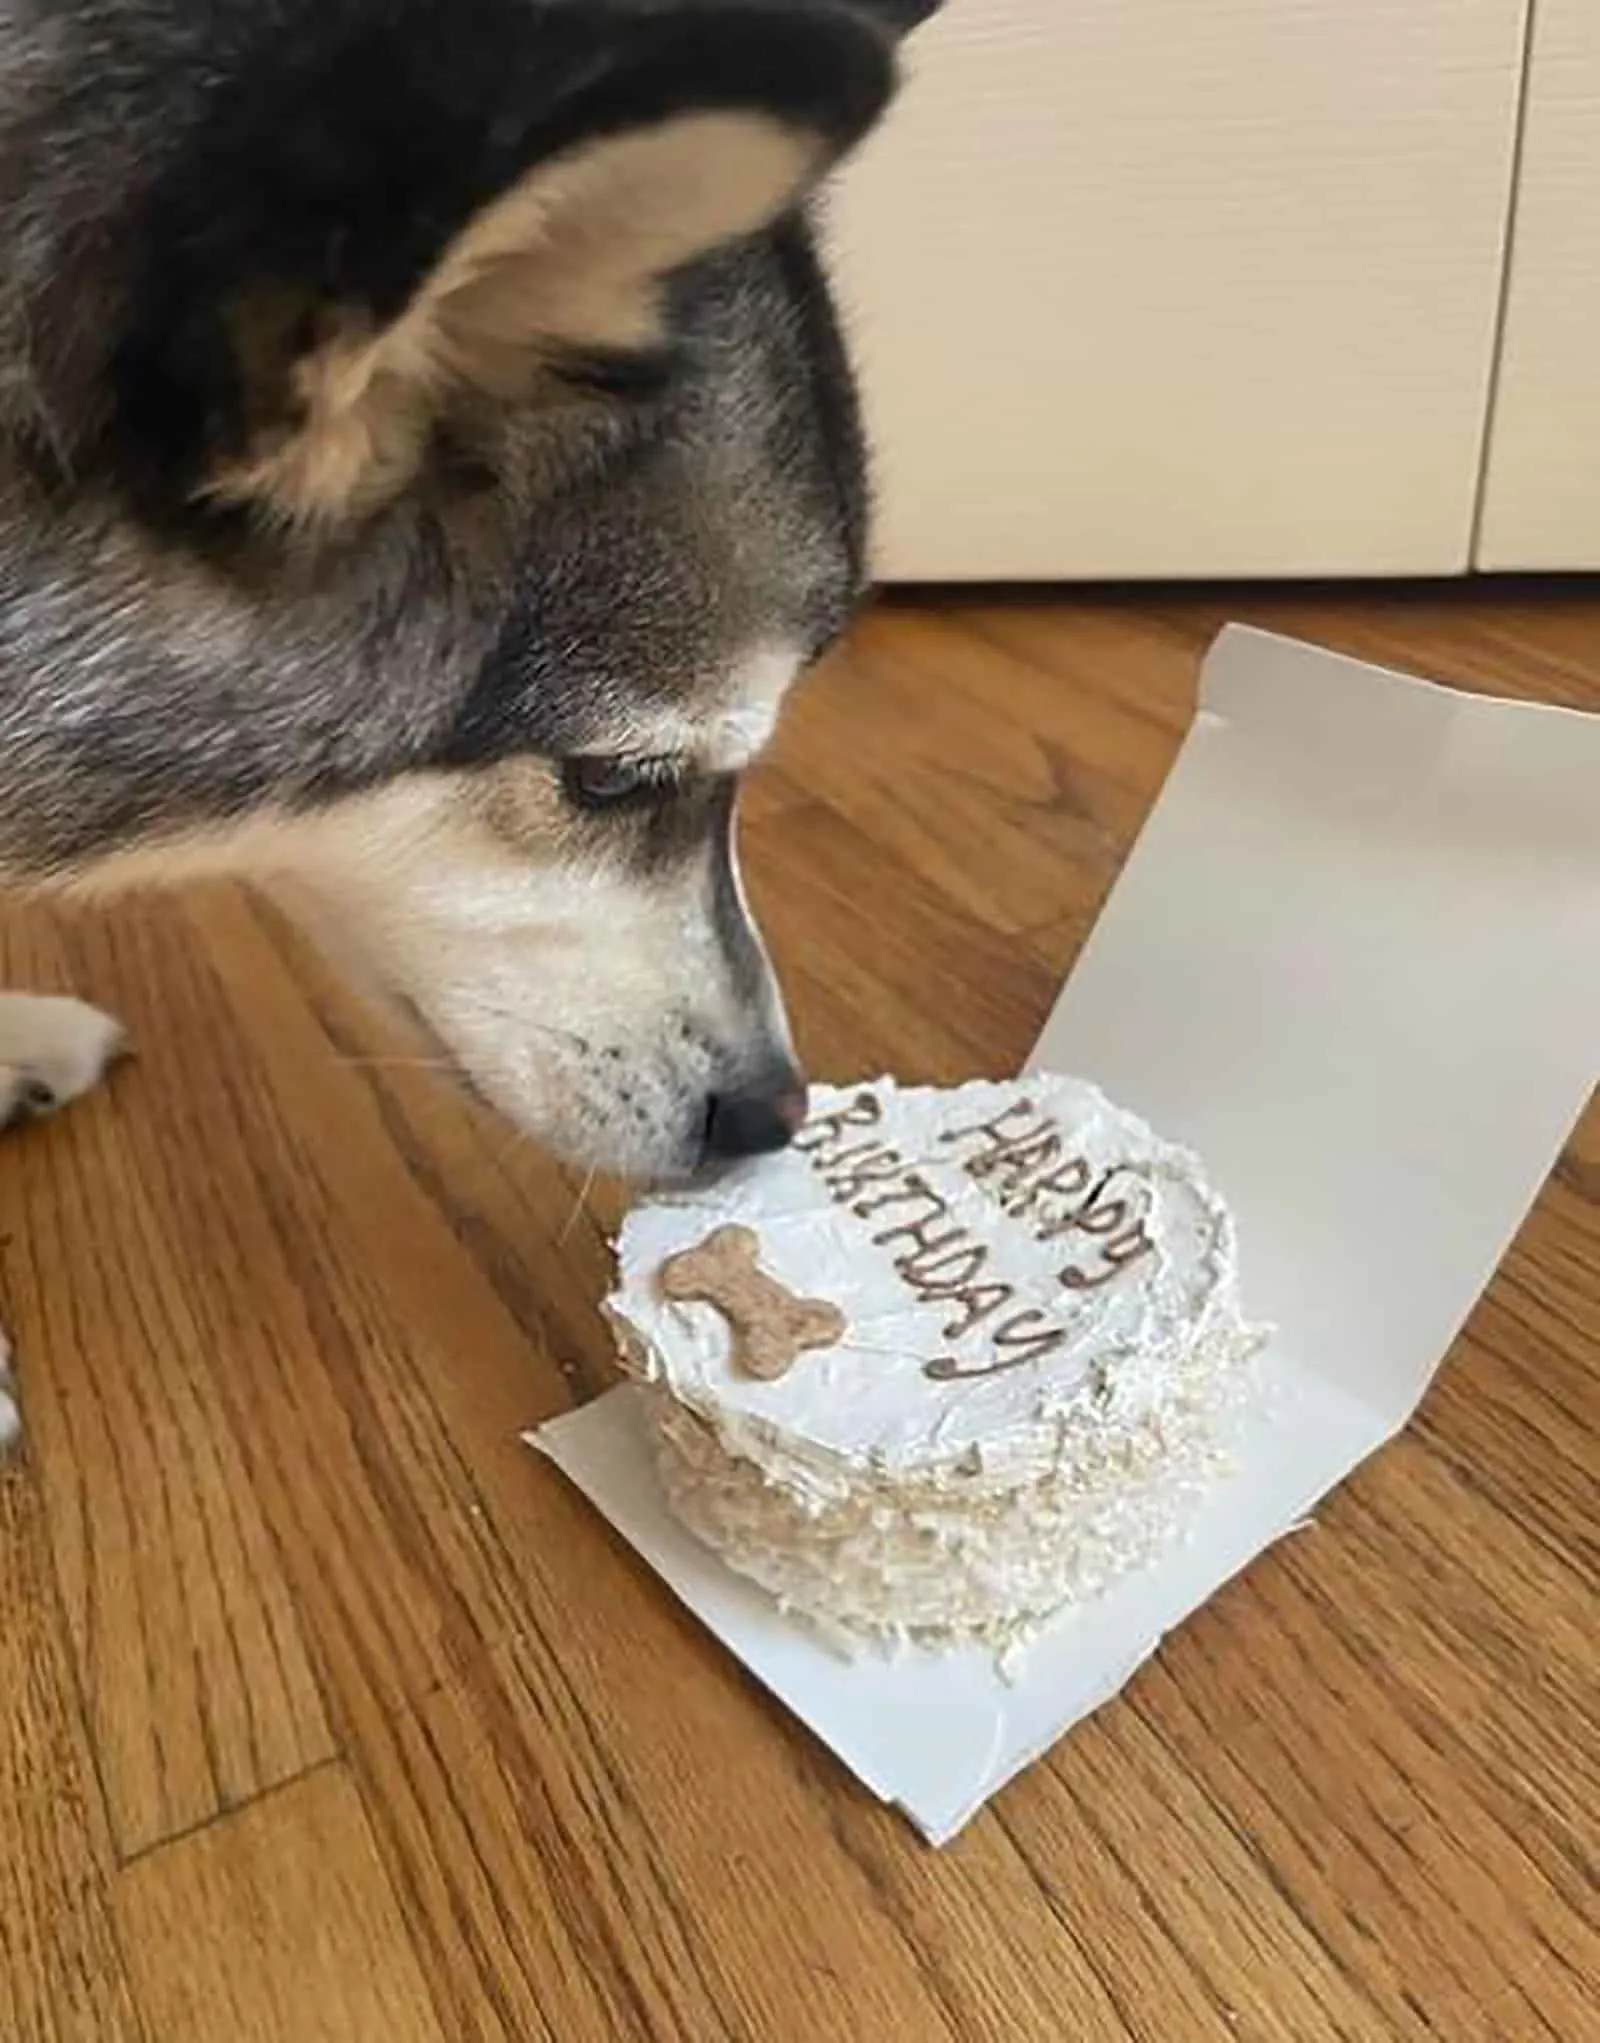 miniature husky sniffing a birthday cake. on the floor